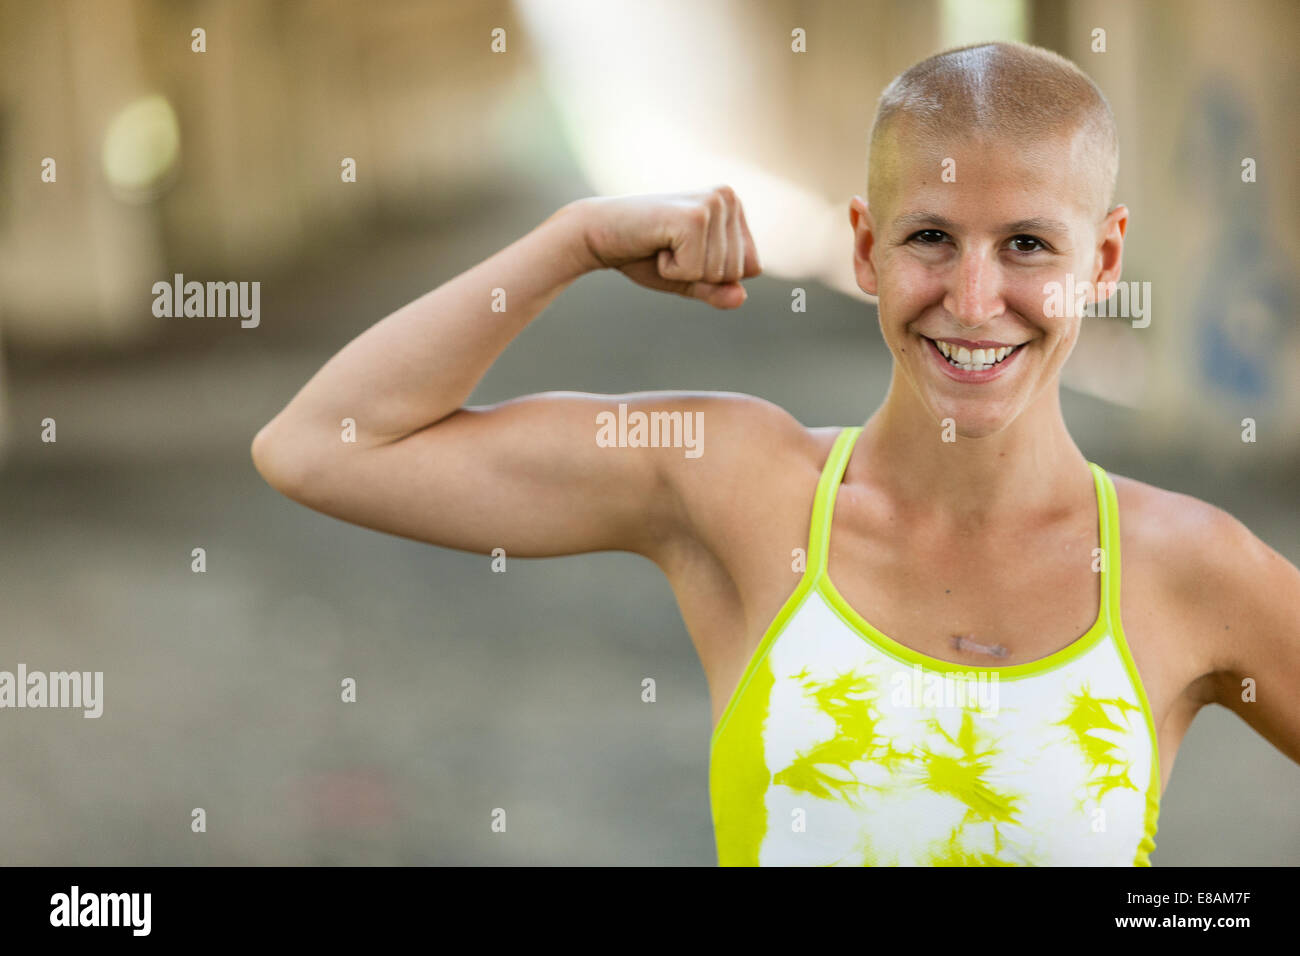 Portrait of determined young female cancer survivor Stock Photo